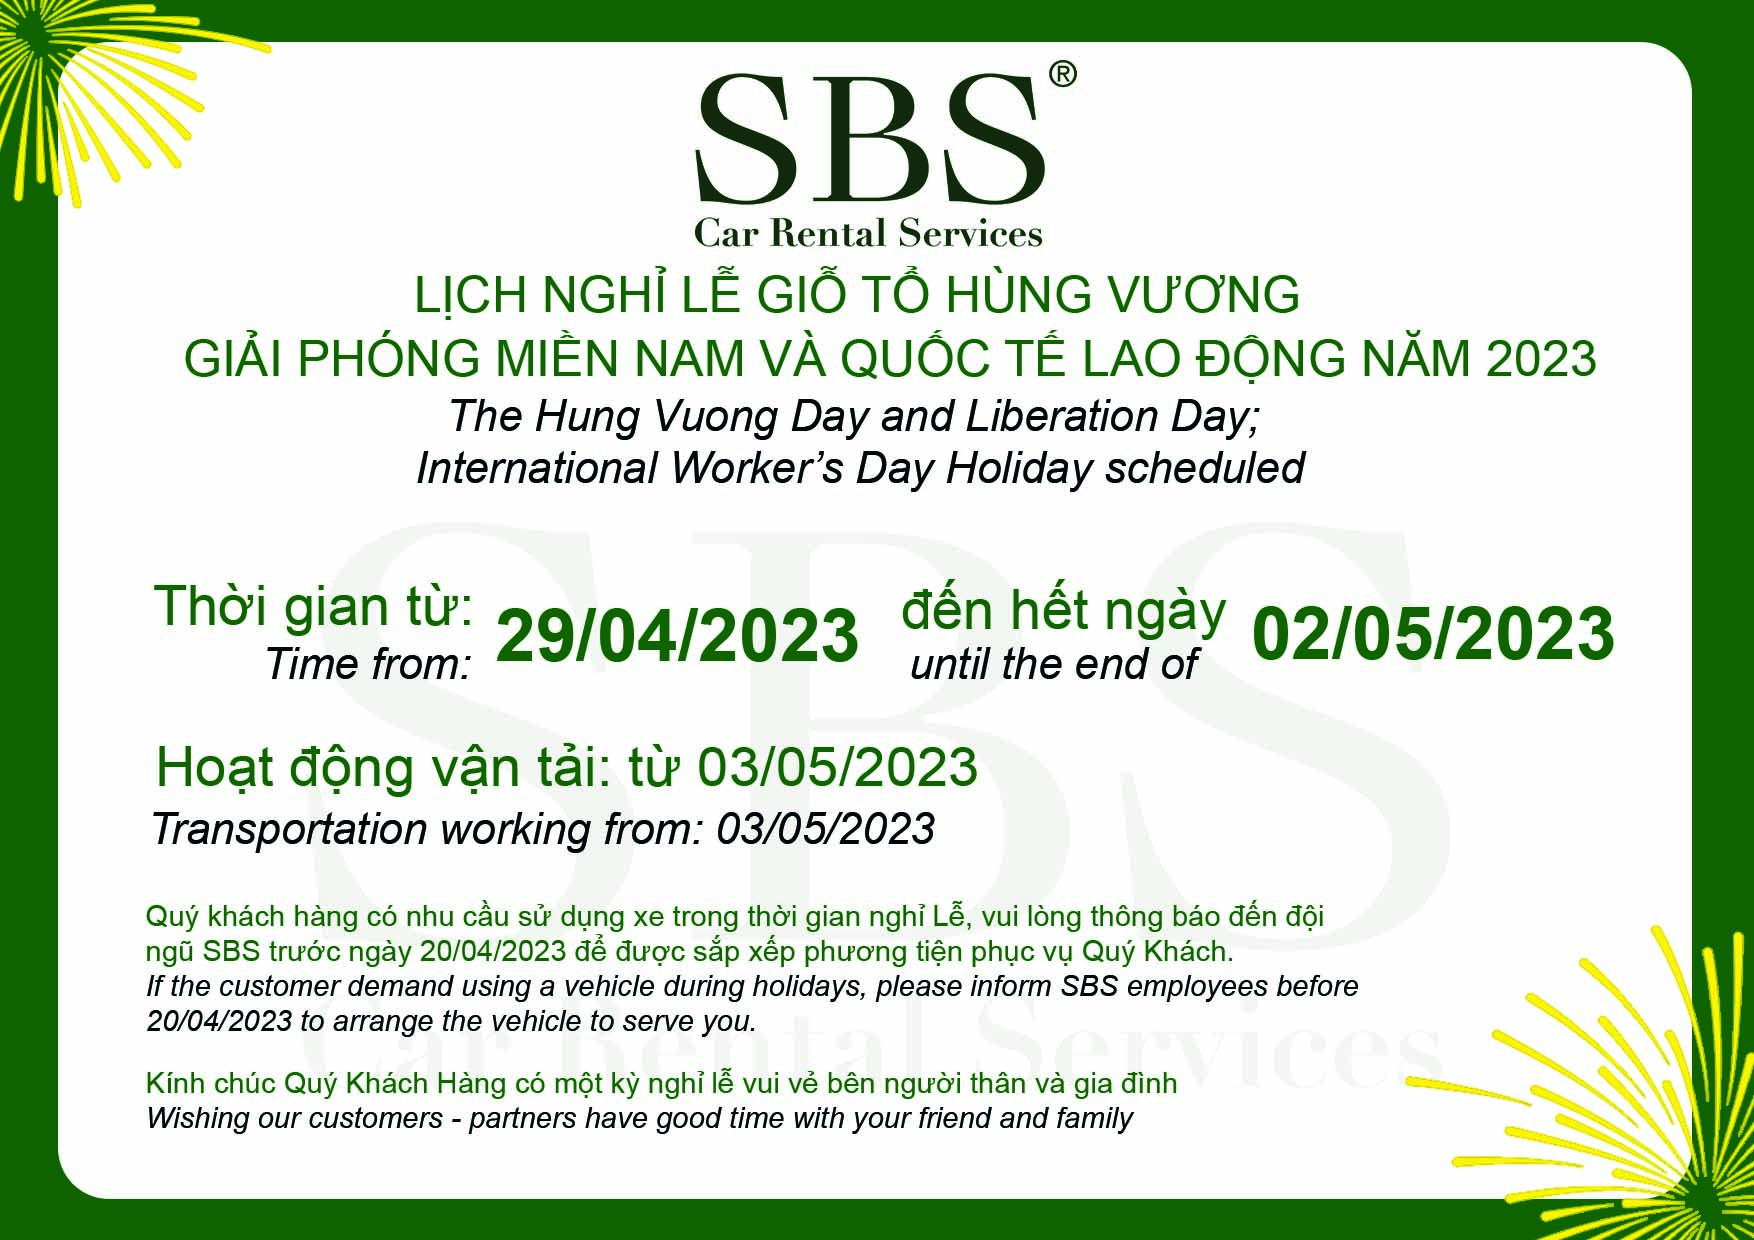 SBS NOTIFICATION - THE HUNG VUONG DAY - LIBERATION DAY - INTERNATIONAL WORK’S DAY - HOLIDAY SCHEDULE 2023